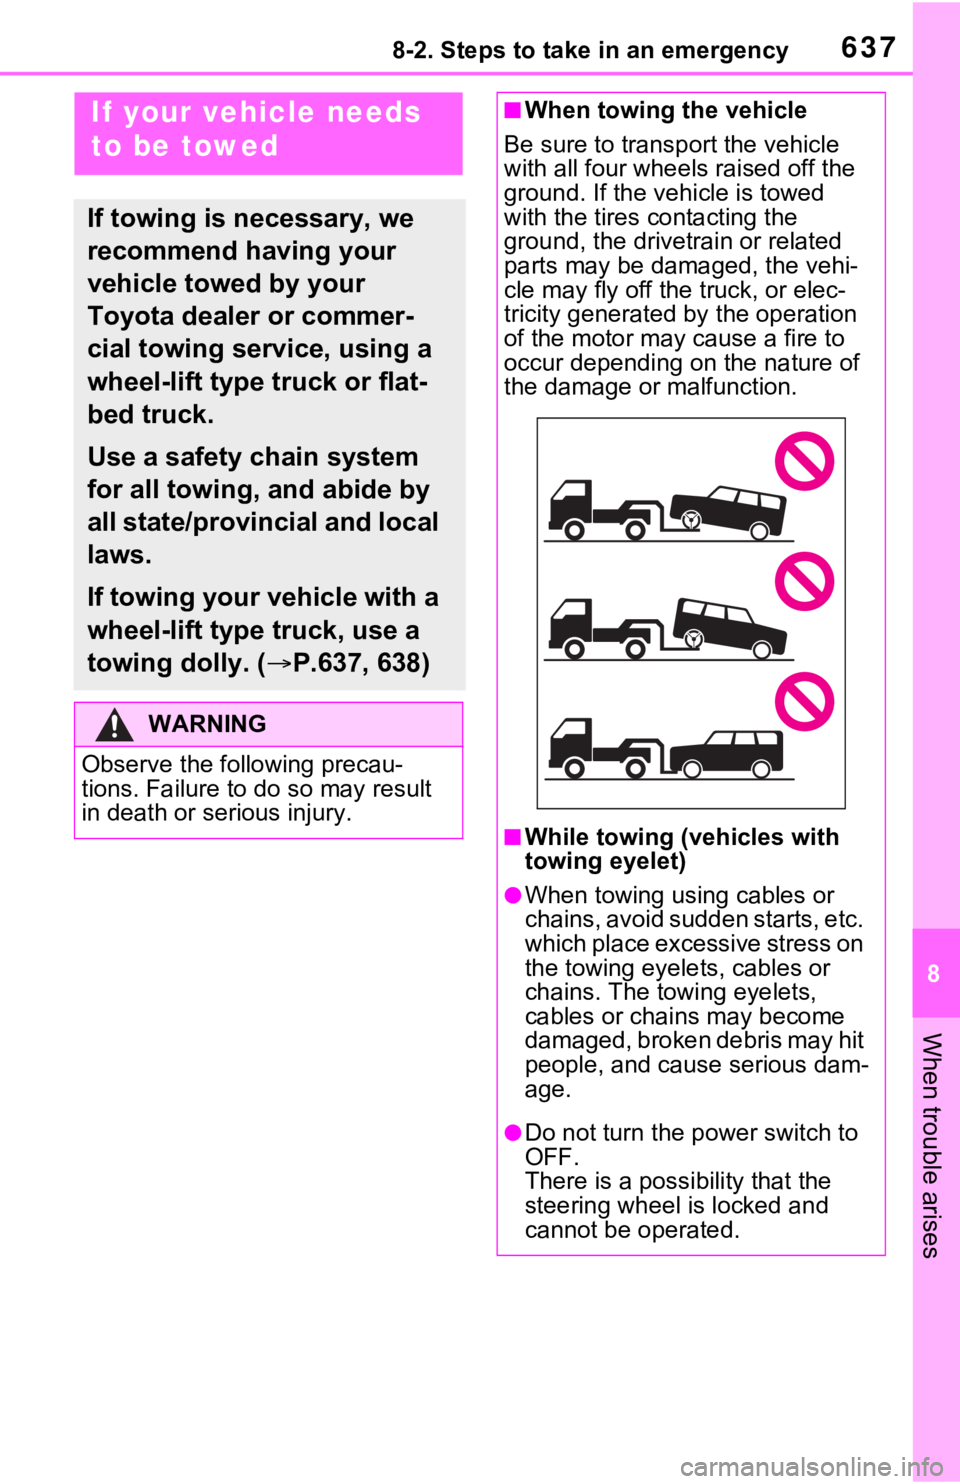 TOYOTA RAV4 HYBRID 2021 Service Manual 6378-2. Steps to take in an emergency
8
When trouble arises
8-2.Steps to take in an emergency
If your vehicle needs 
to be towed
If towing is necessary, we 
recommend having your 
vehicle towed by you